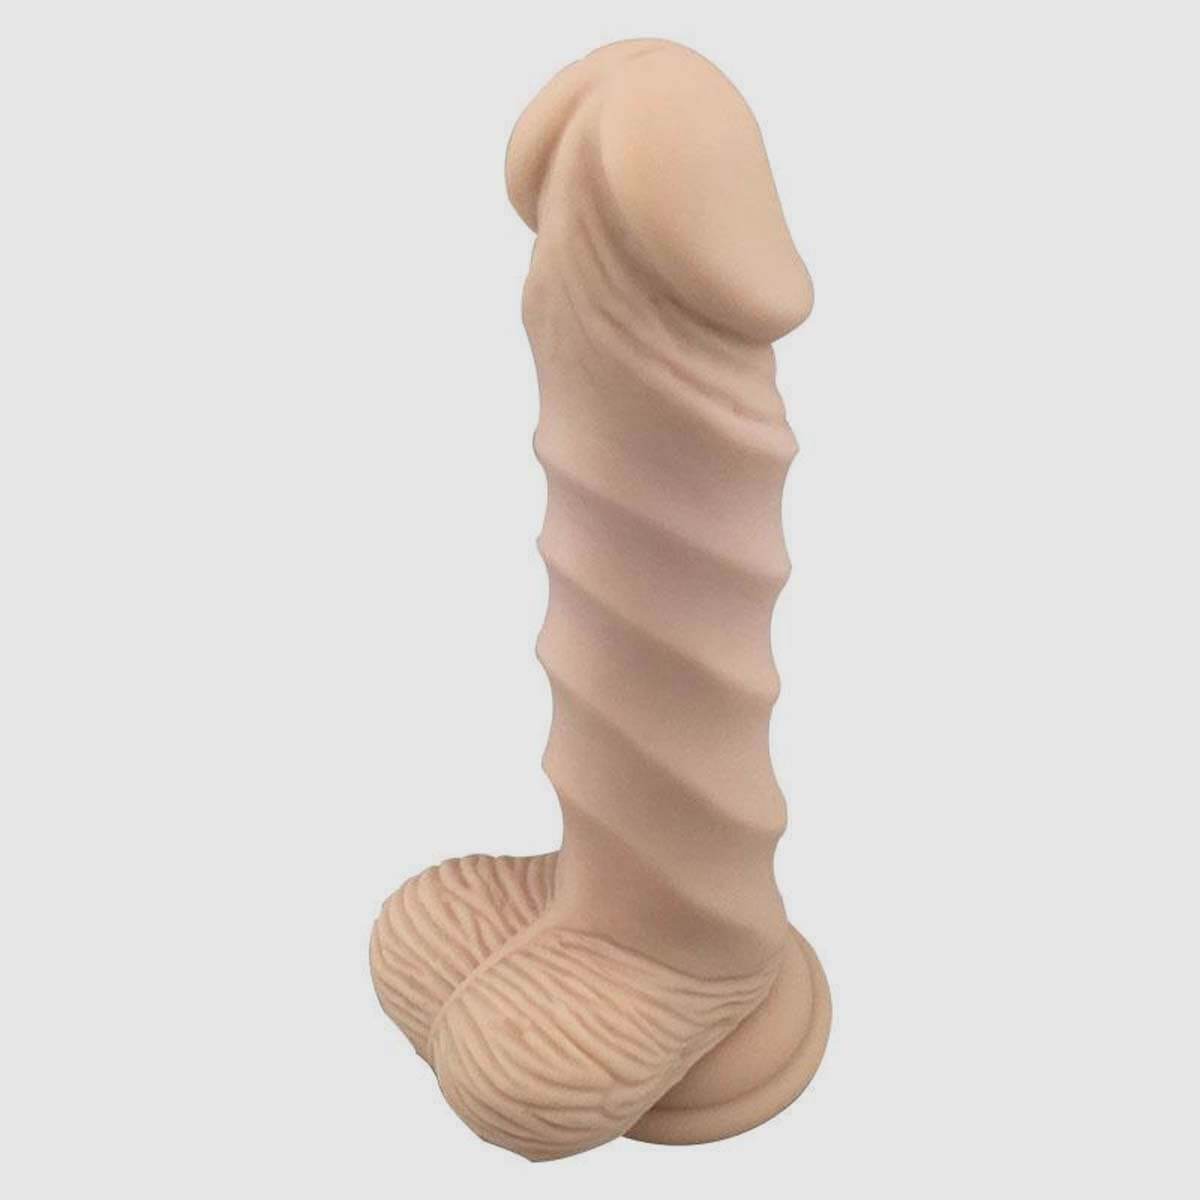 T&F Knight 8" Silicone Spiral Dildo - Flesh - Thorn & Feather